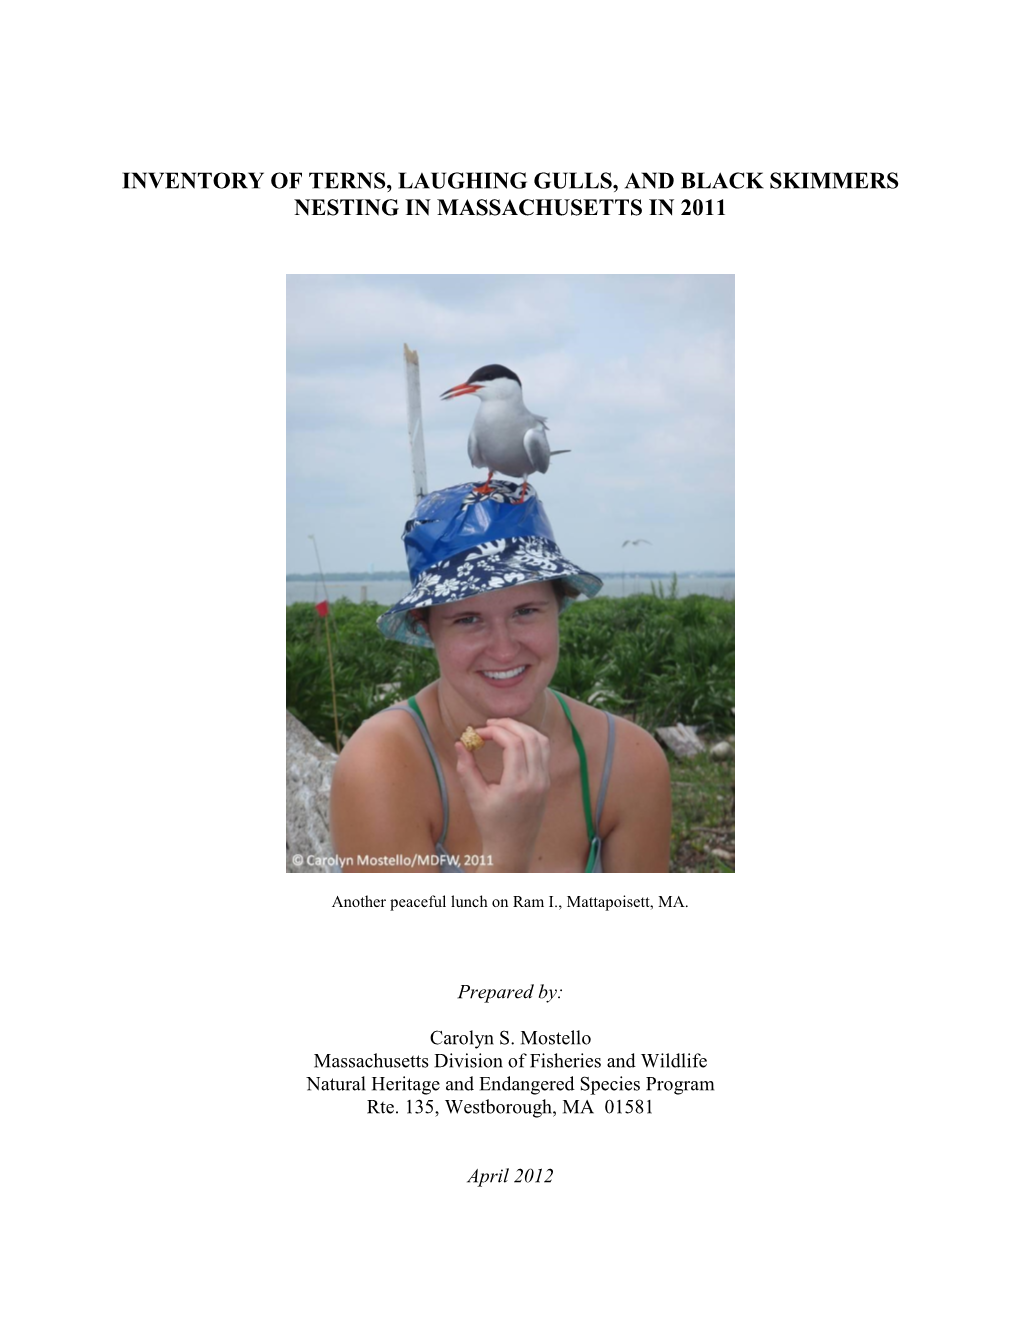 Inventory of Terns, Laughing Gulls, and Black Skimmers Nesting in Massachusetts, 2011